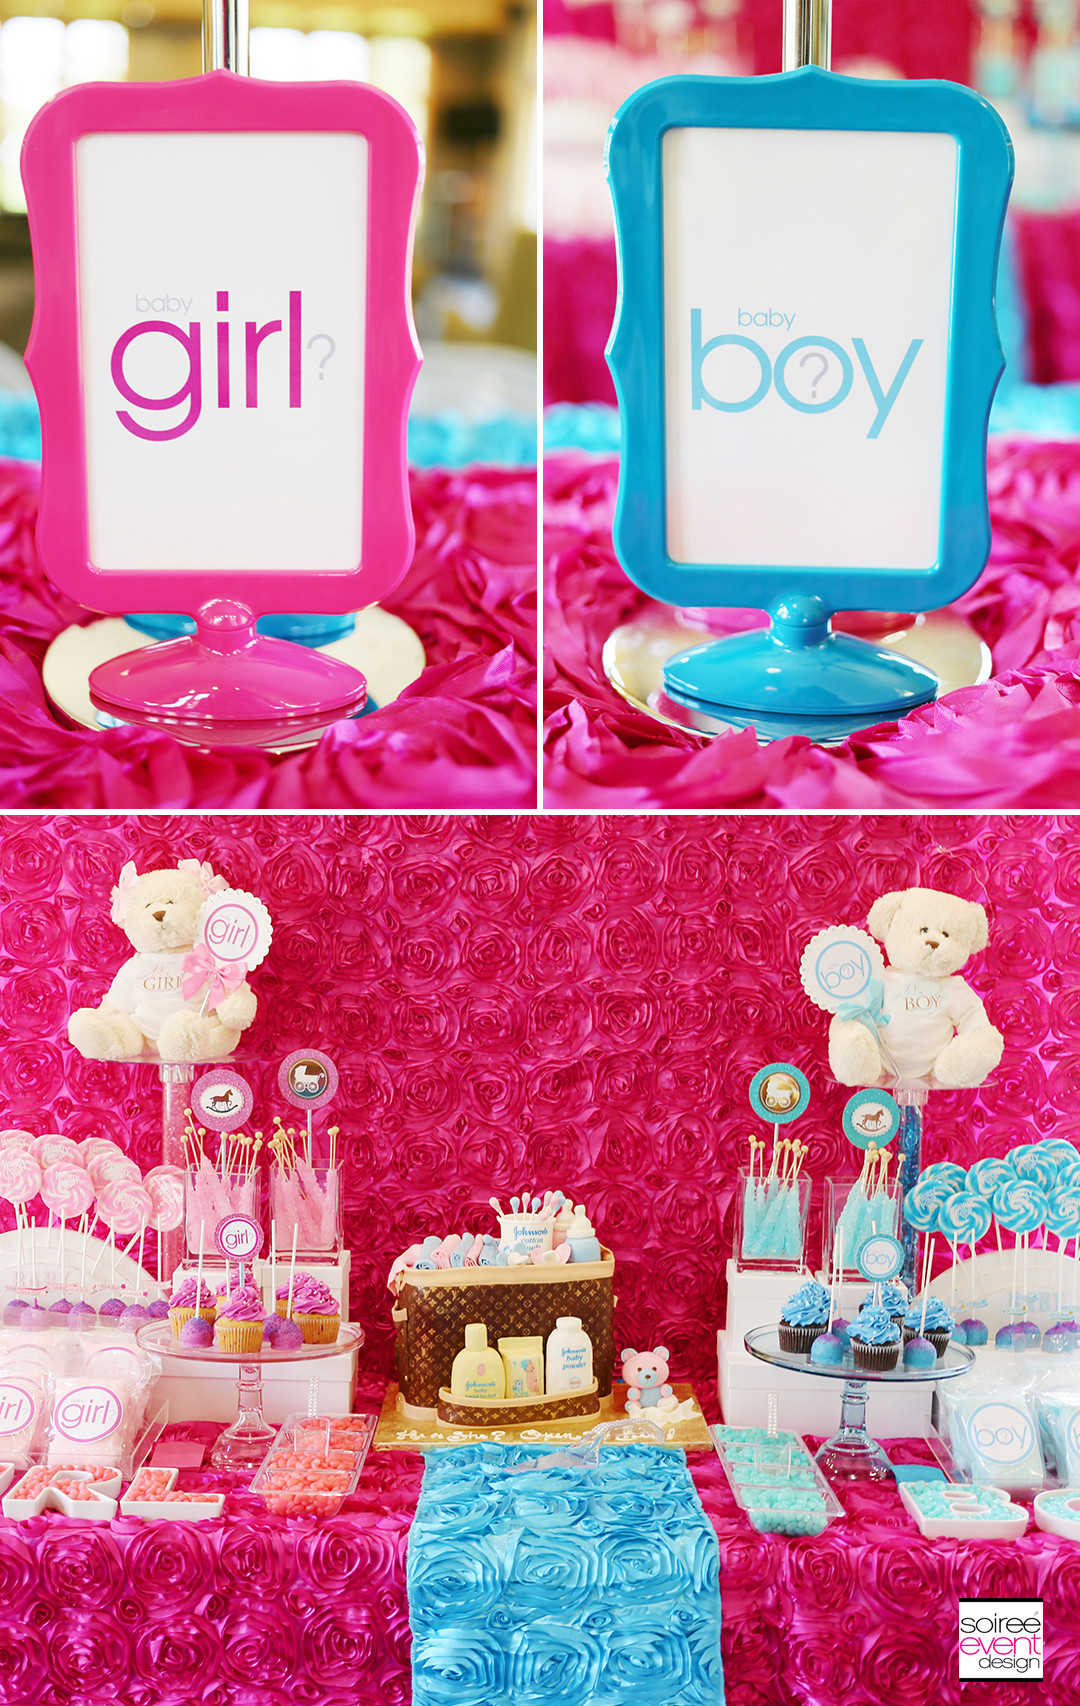 Party City Gender Reveal Ideas
 How to Host Your Own Gender Reveal Party Soiree Event